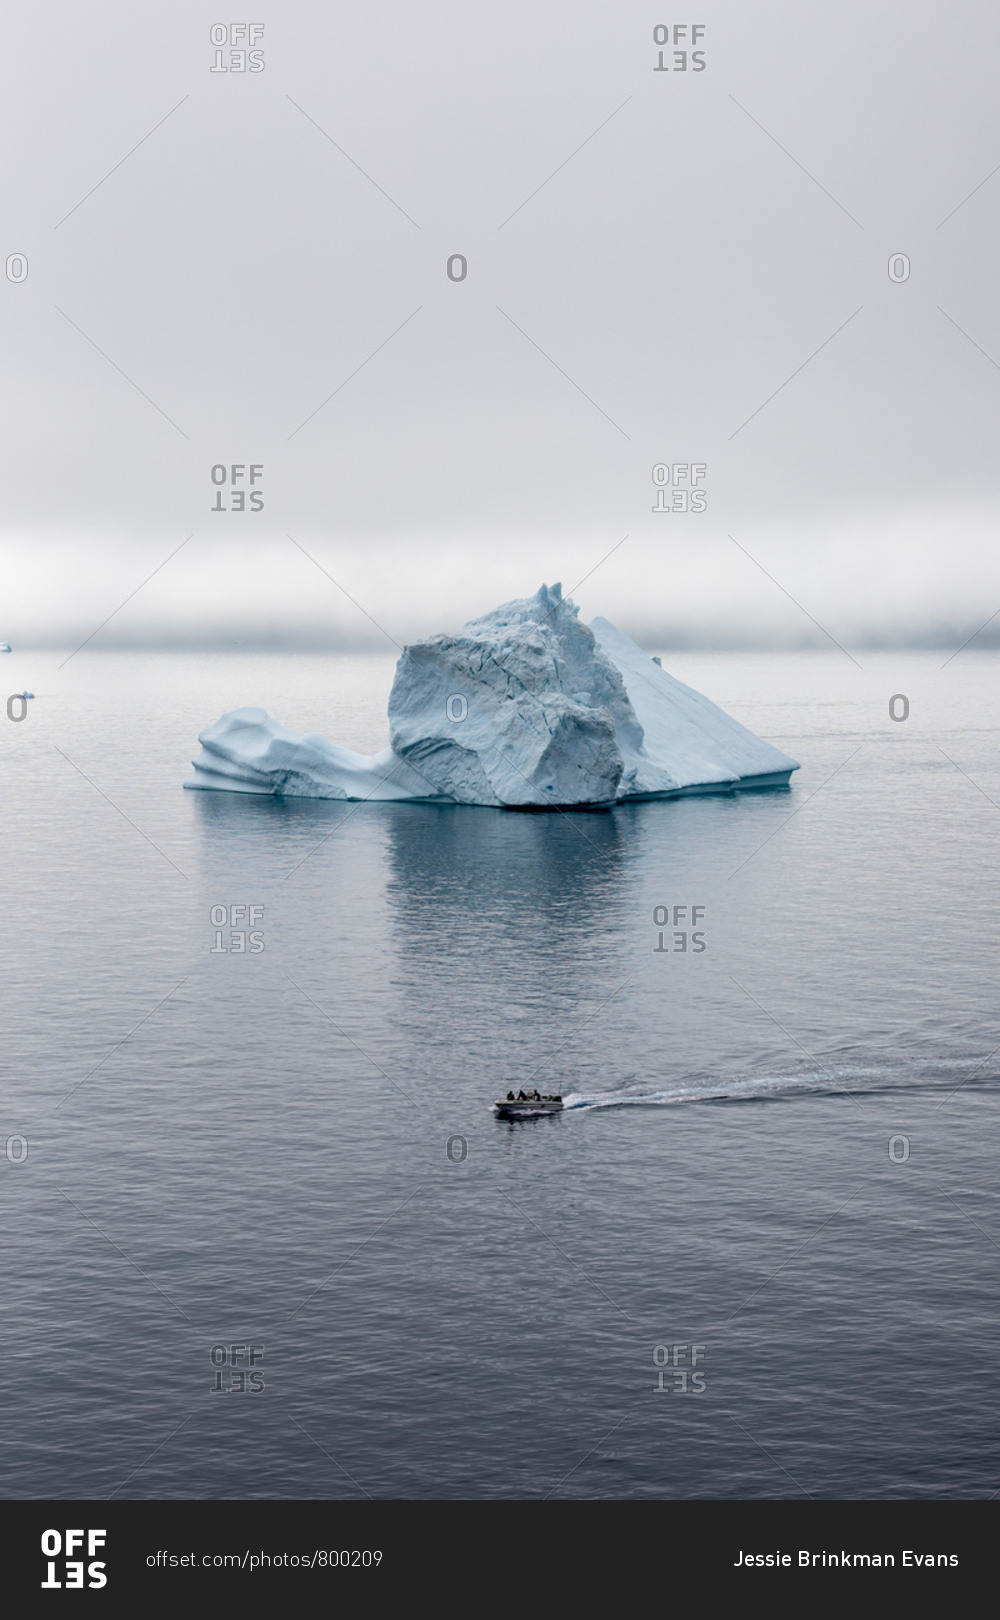 Small boat moving past iceberg in the sea